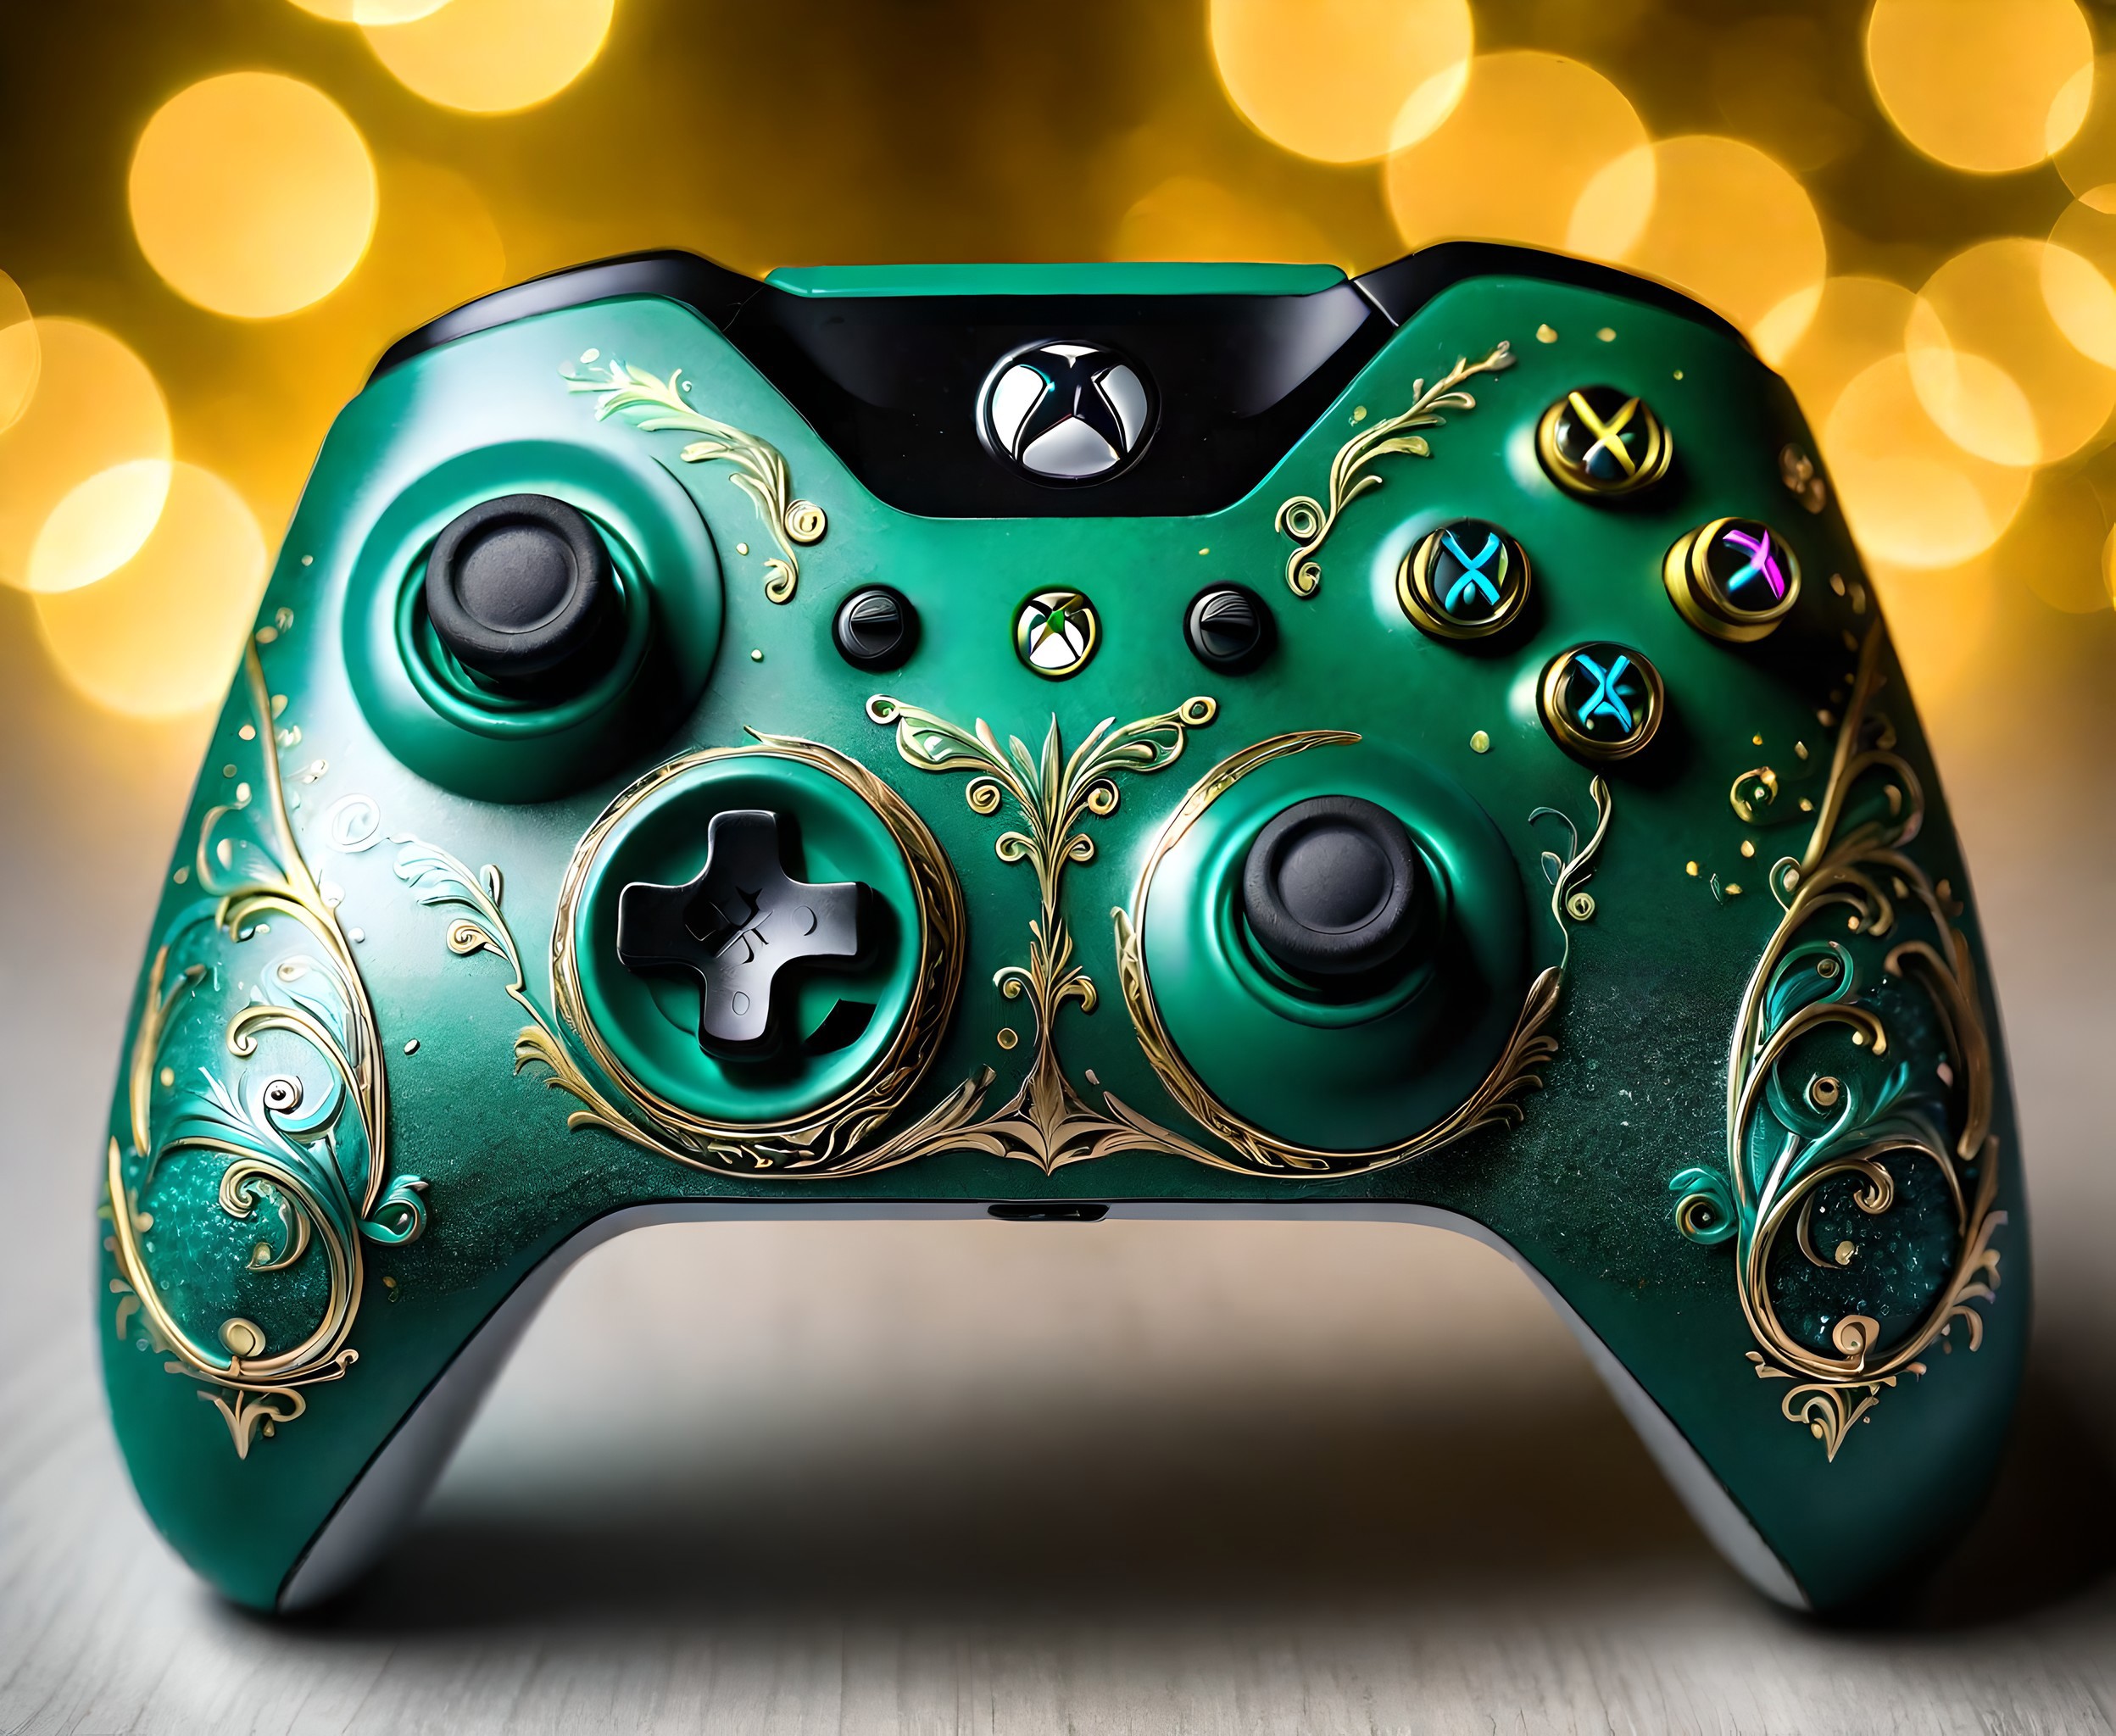 A green customized Xbox One controller with colored buttons and ornate designs.